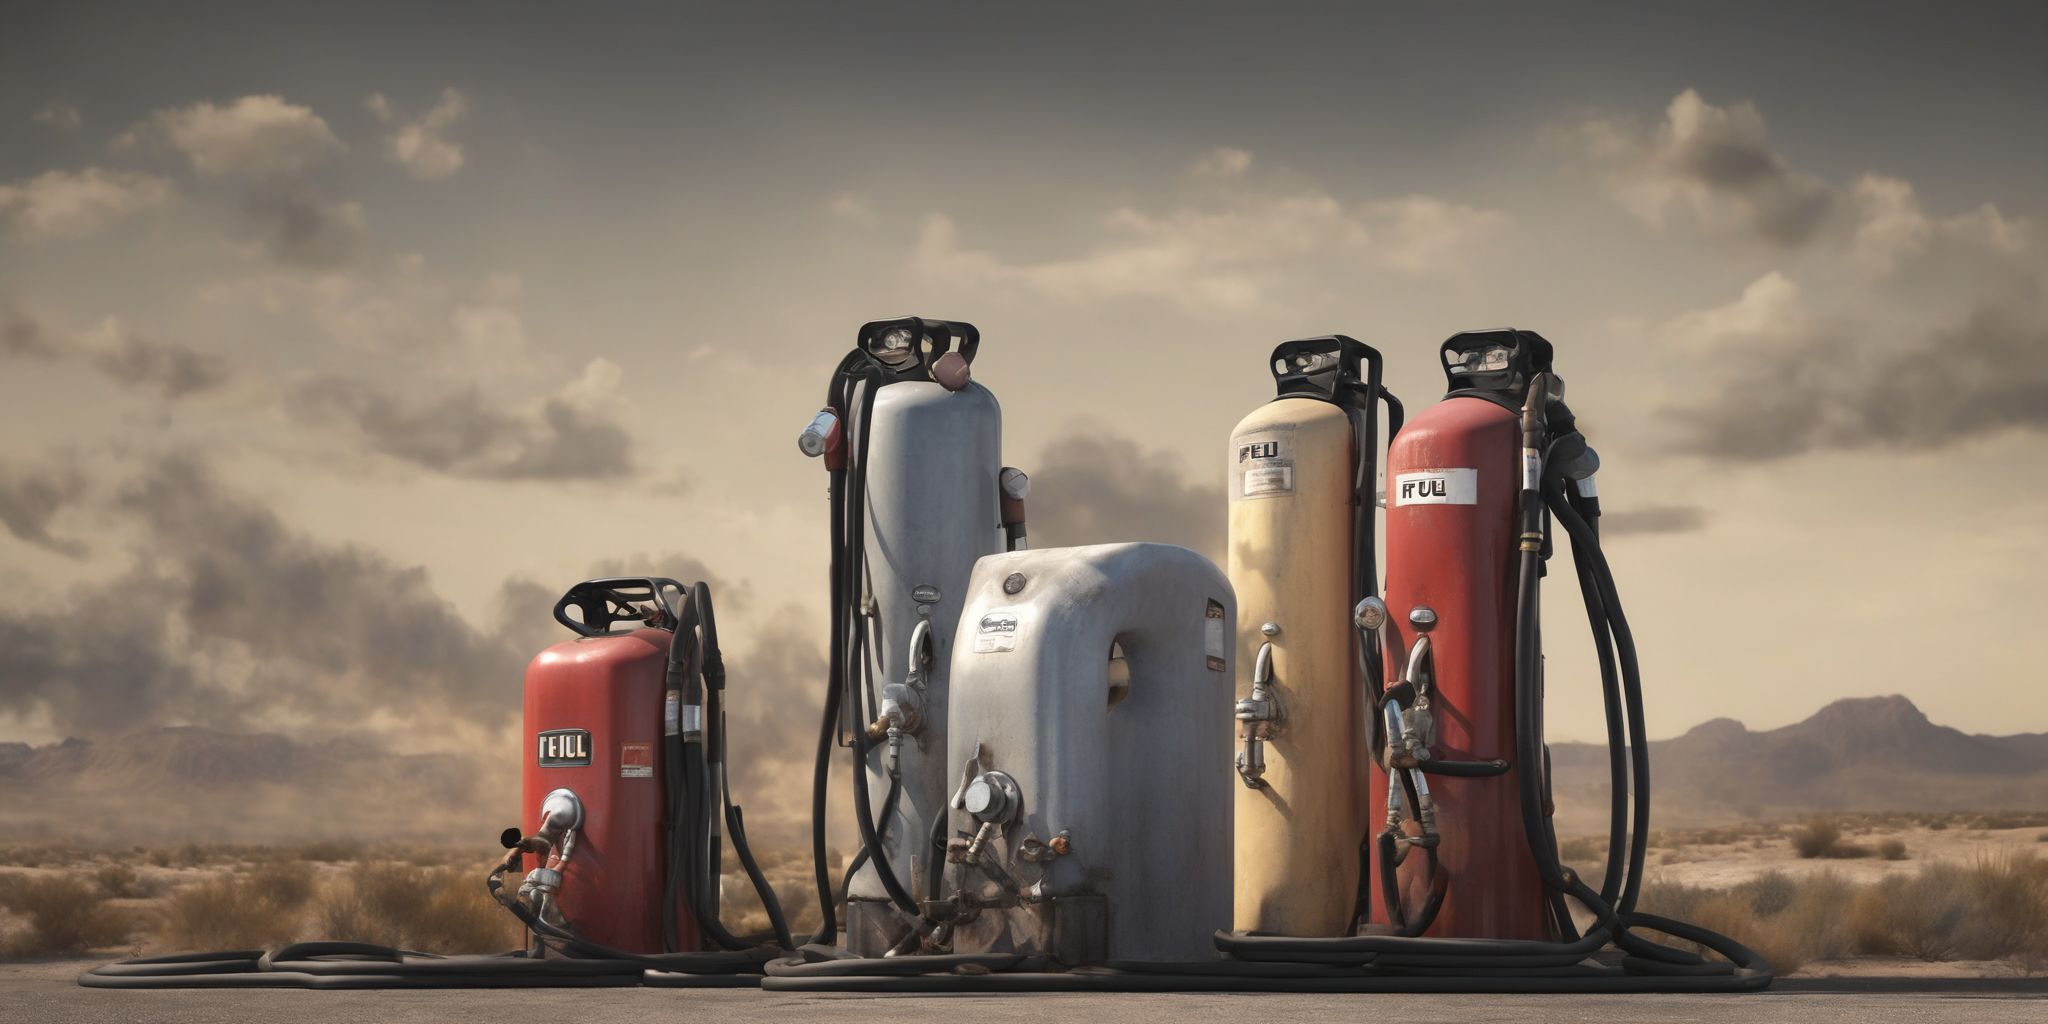 Fuel  in realistic, photographic style